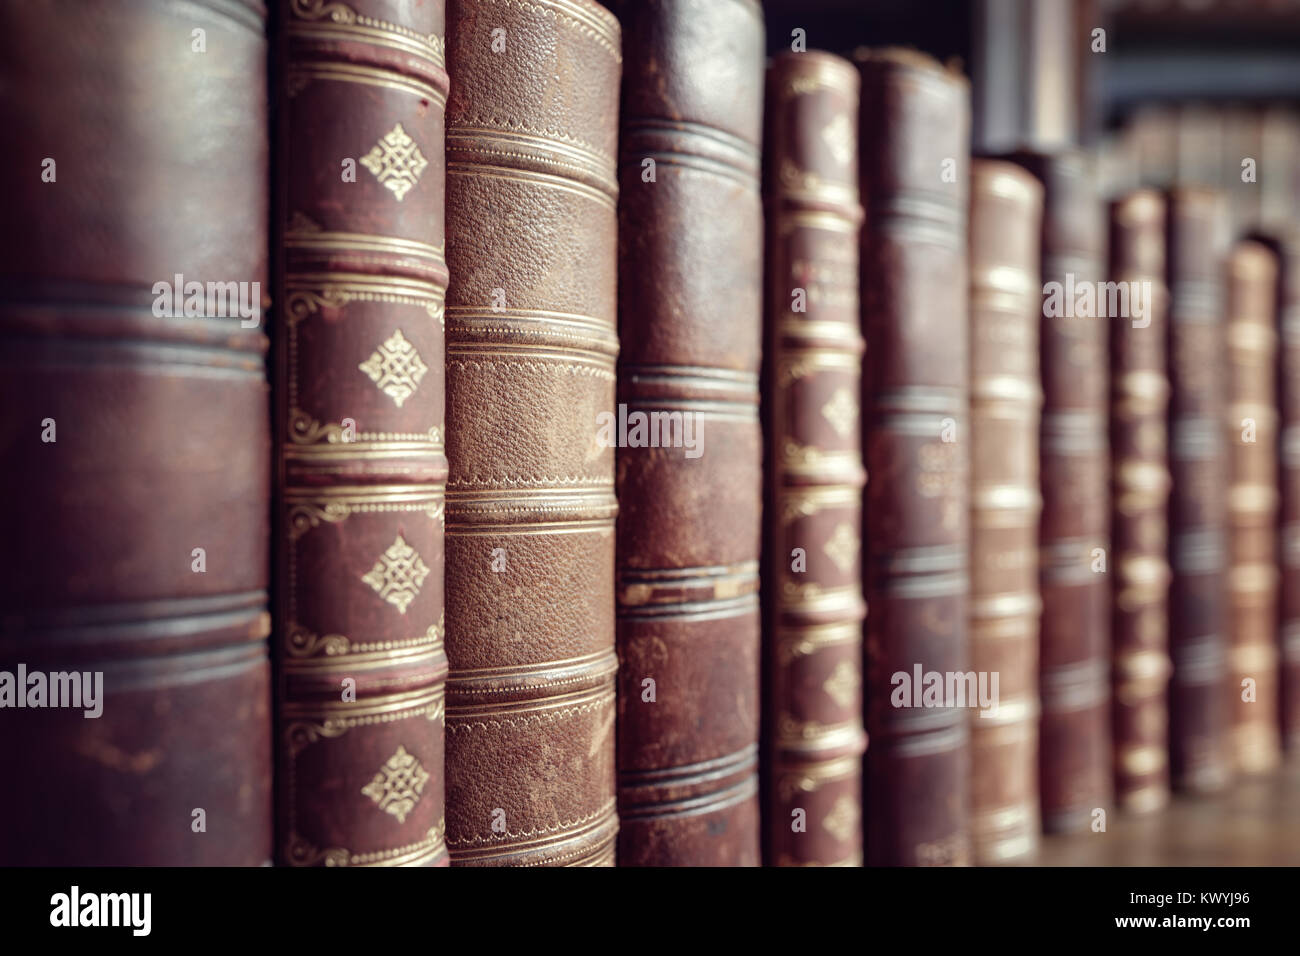 Old leather bound vintage books in a row Stock Photo